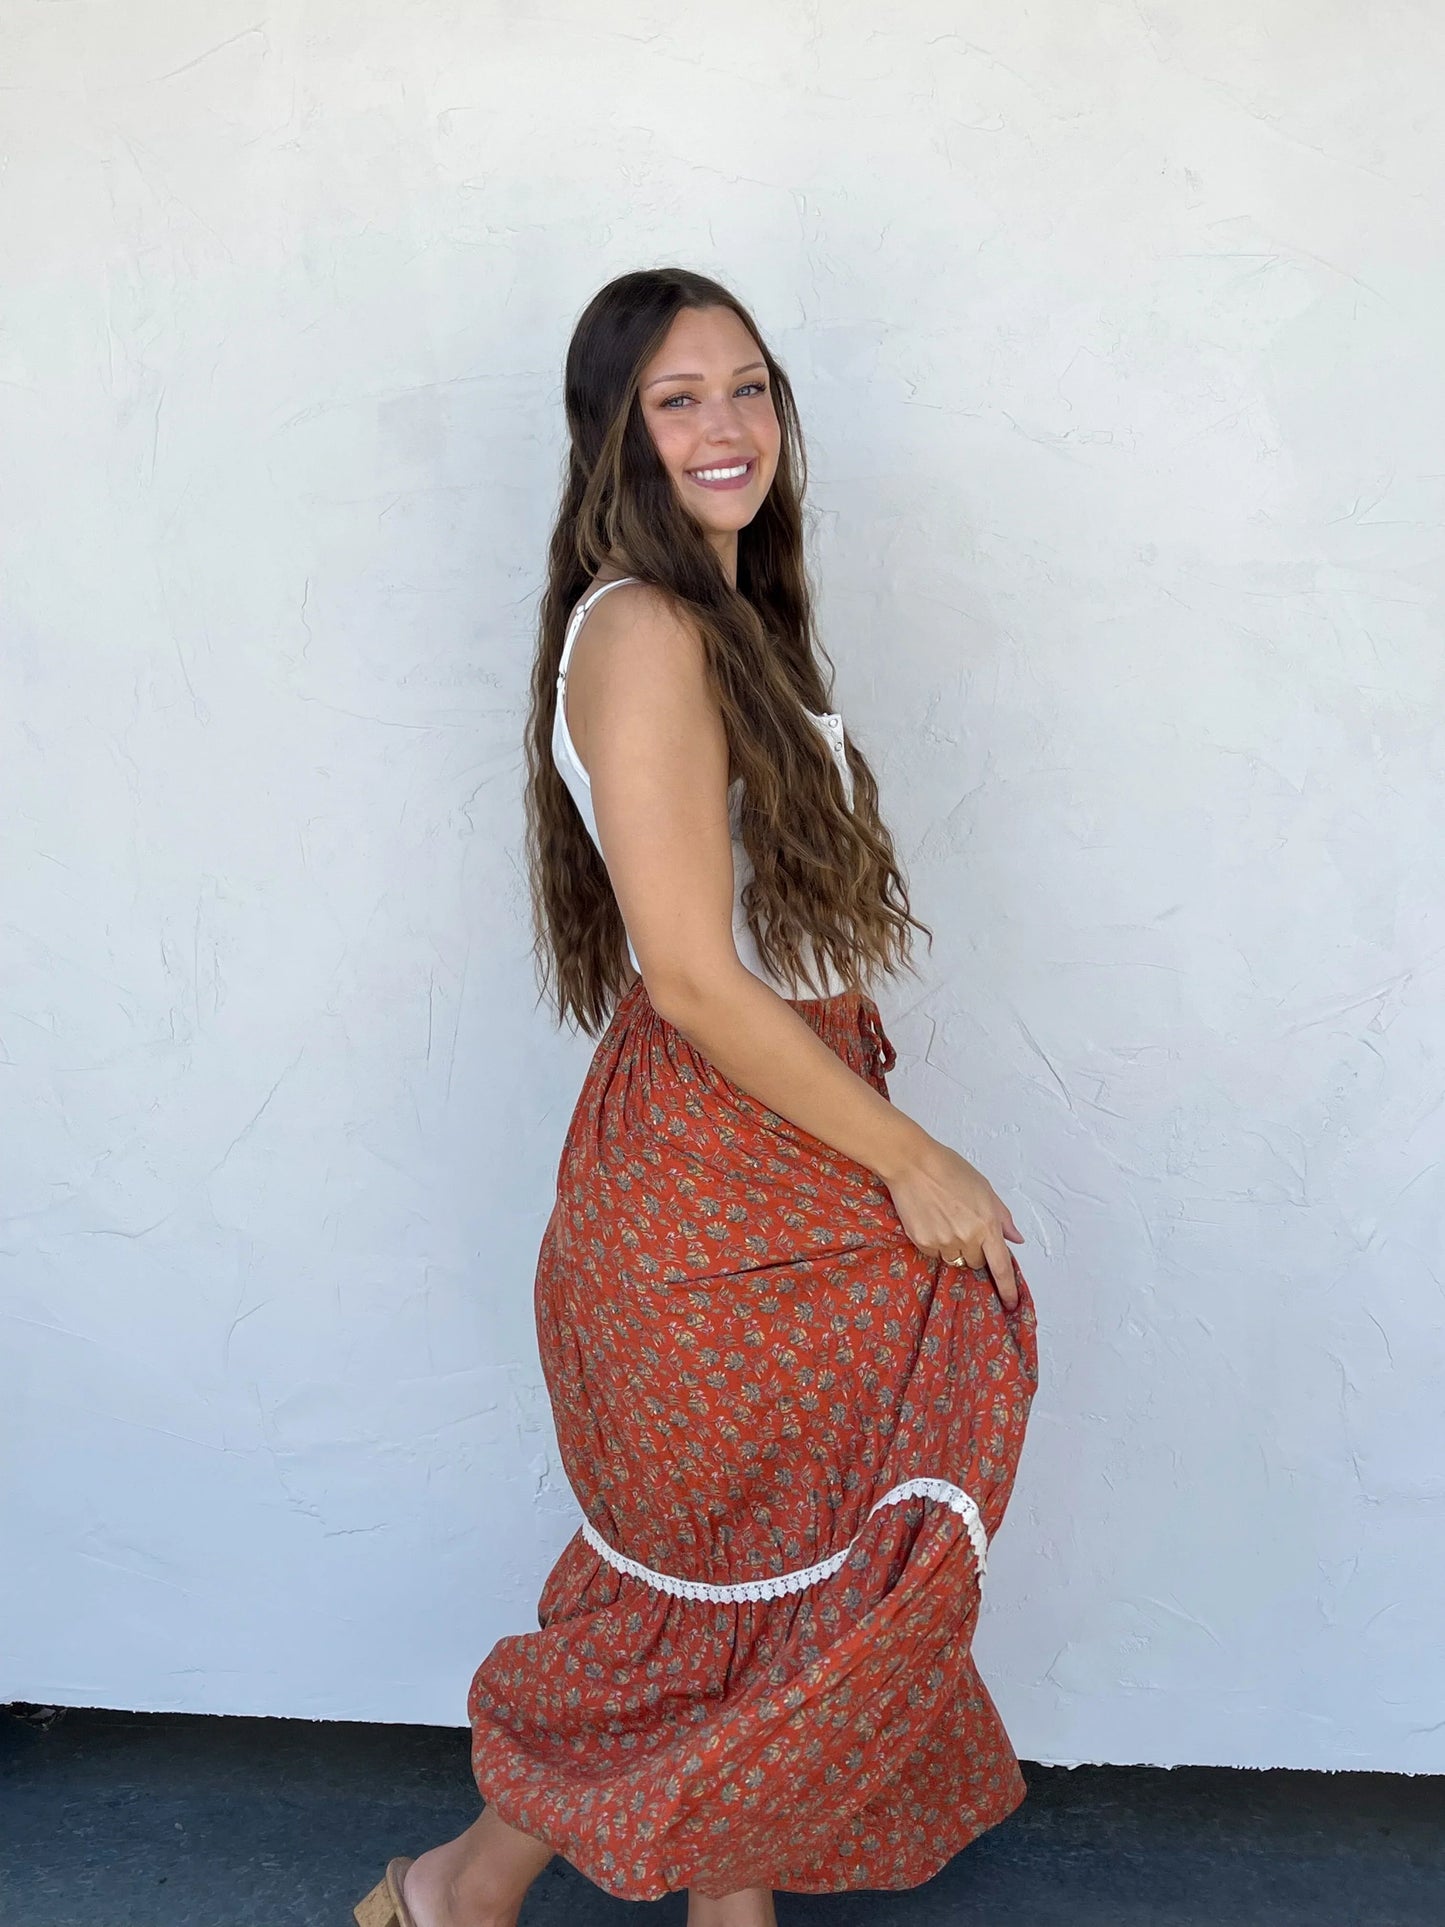 Hippie Chic Skirt In Three Colors